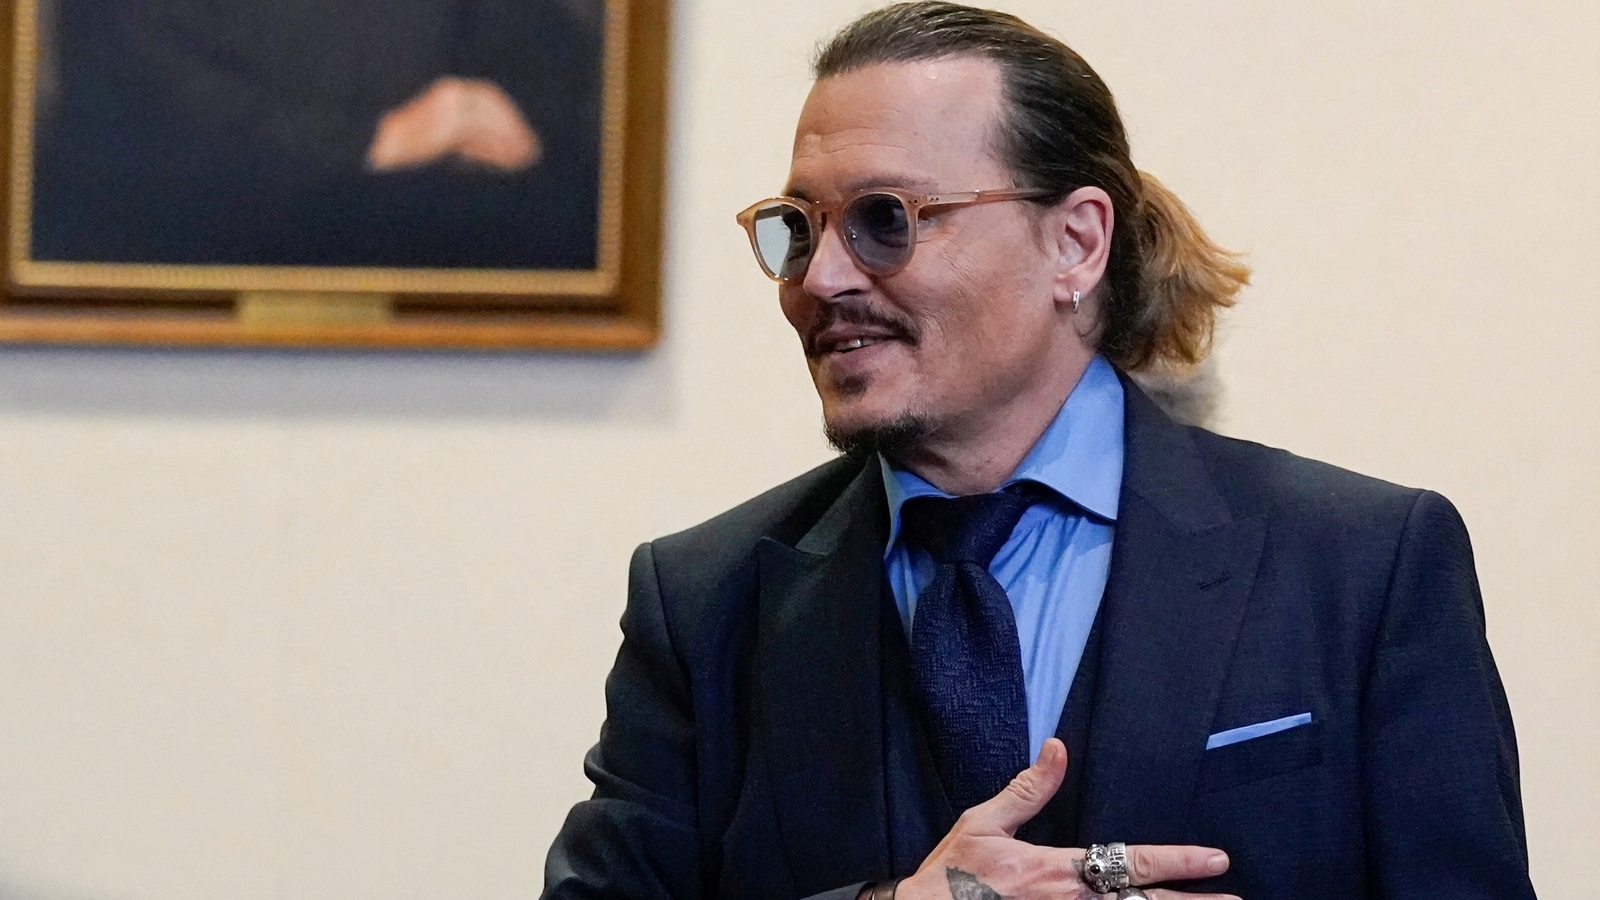 Johnny Depp to direct first film in 25 years, biopic on Amedeo Modigliani co-produced by him and Al Pacino